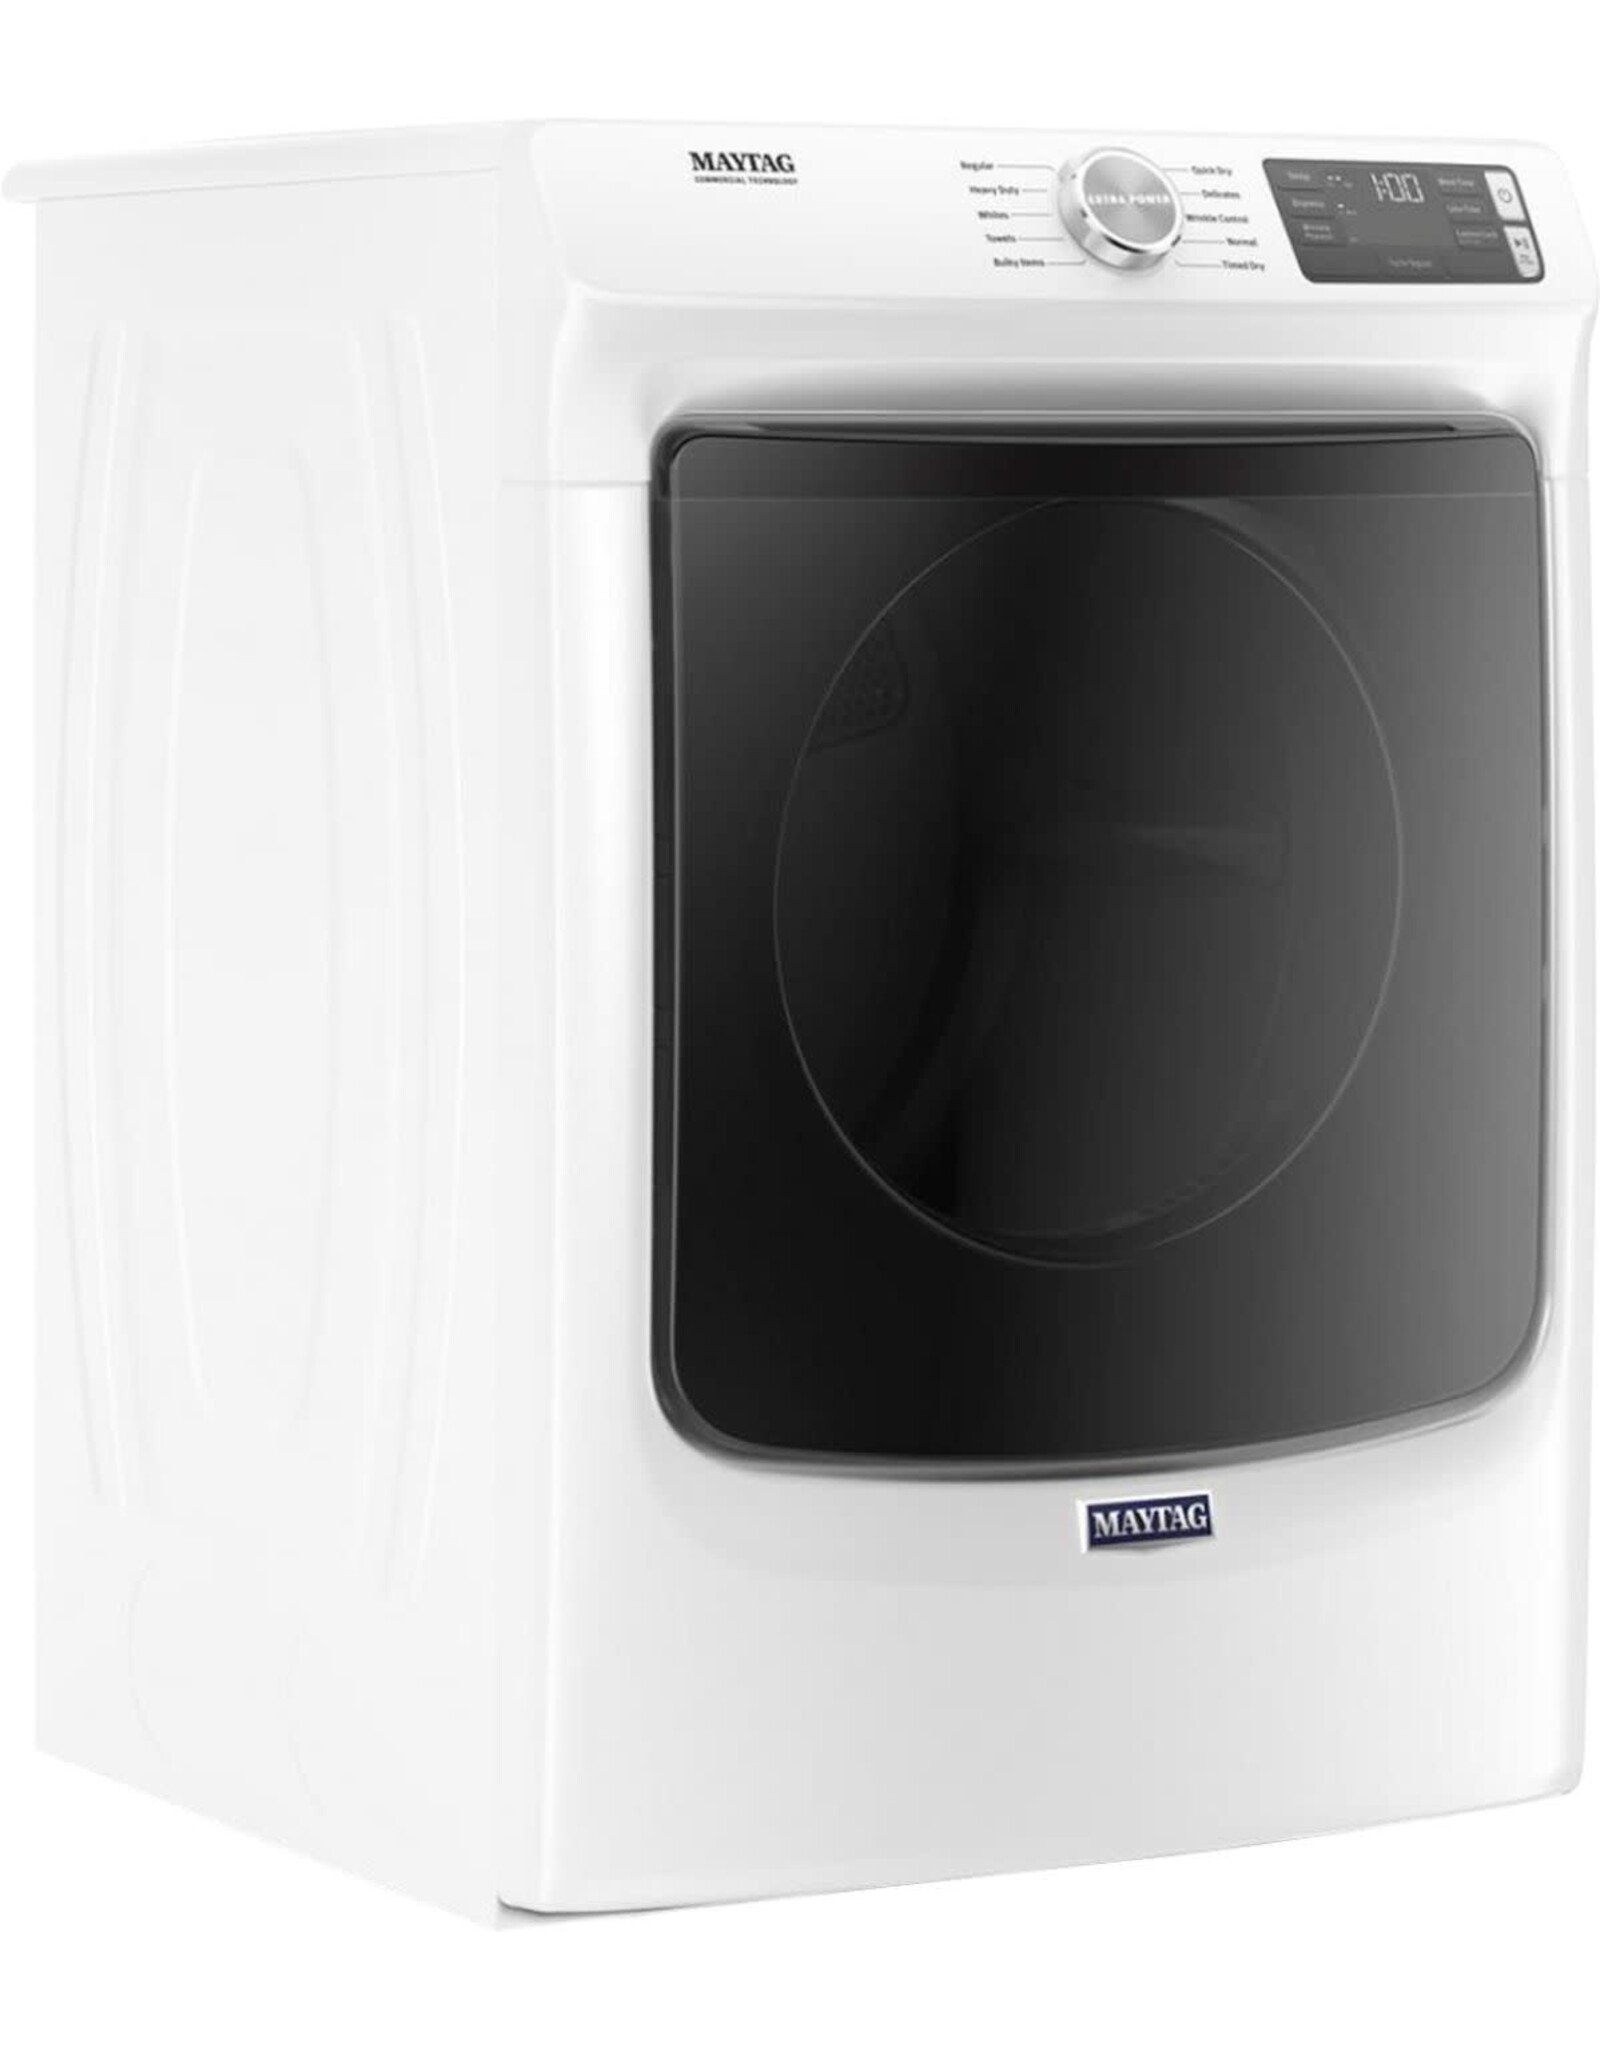 MAYTAG MED5630HW 7.3 cu. ft. 240-Volt White Stackable Electric Vented Dryer with Quick Dry Cycle, ENERGY STAR